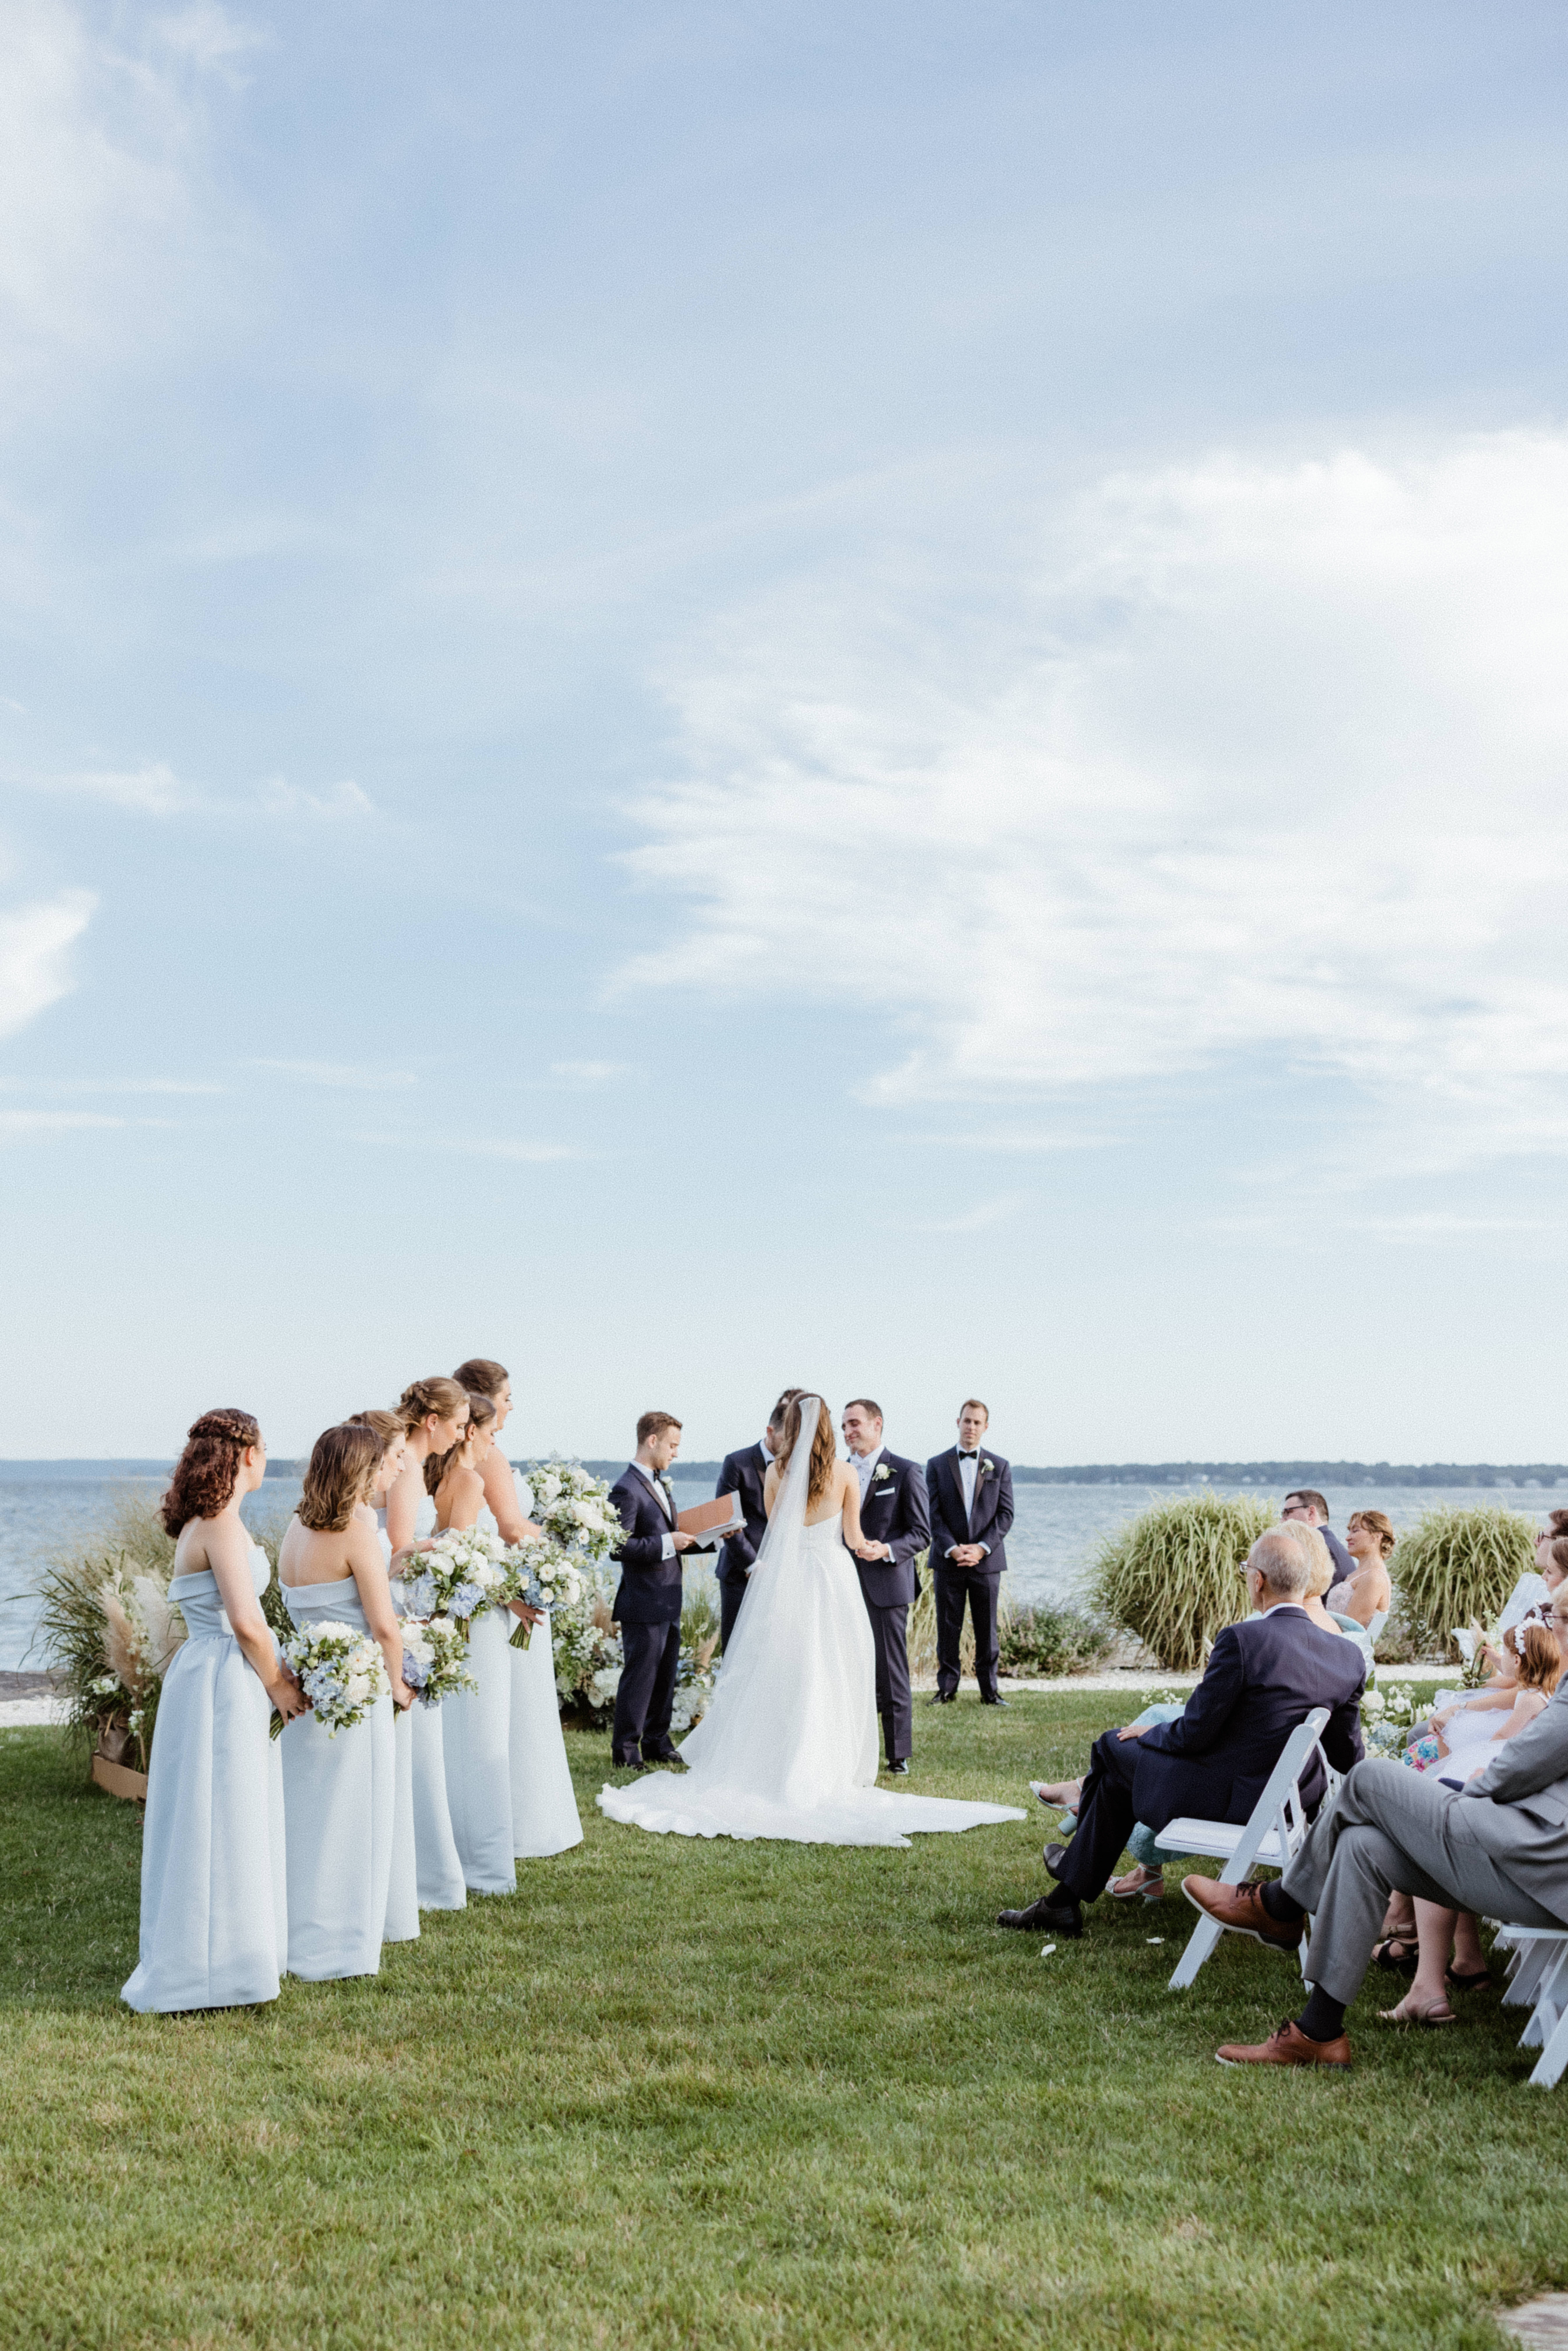 stunning wedding ceremony takes place in front of the Atlantic